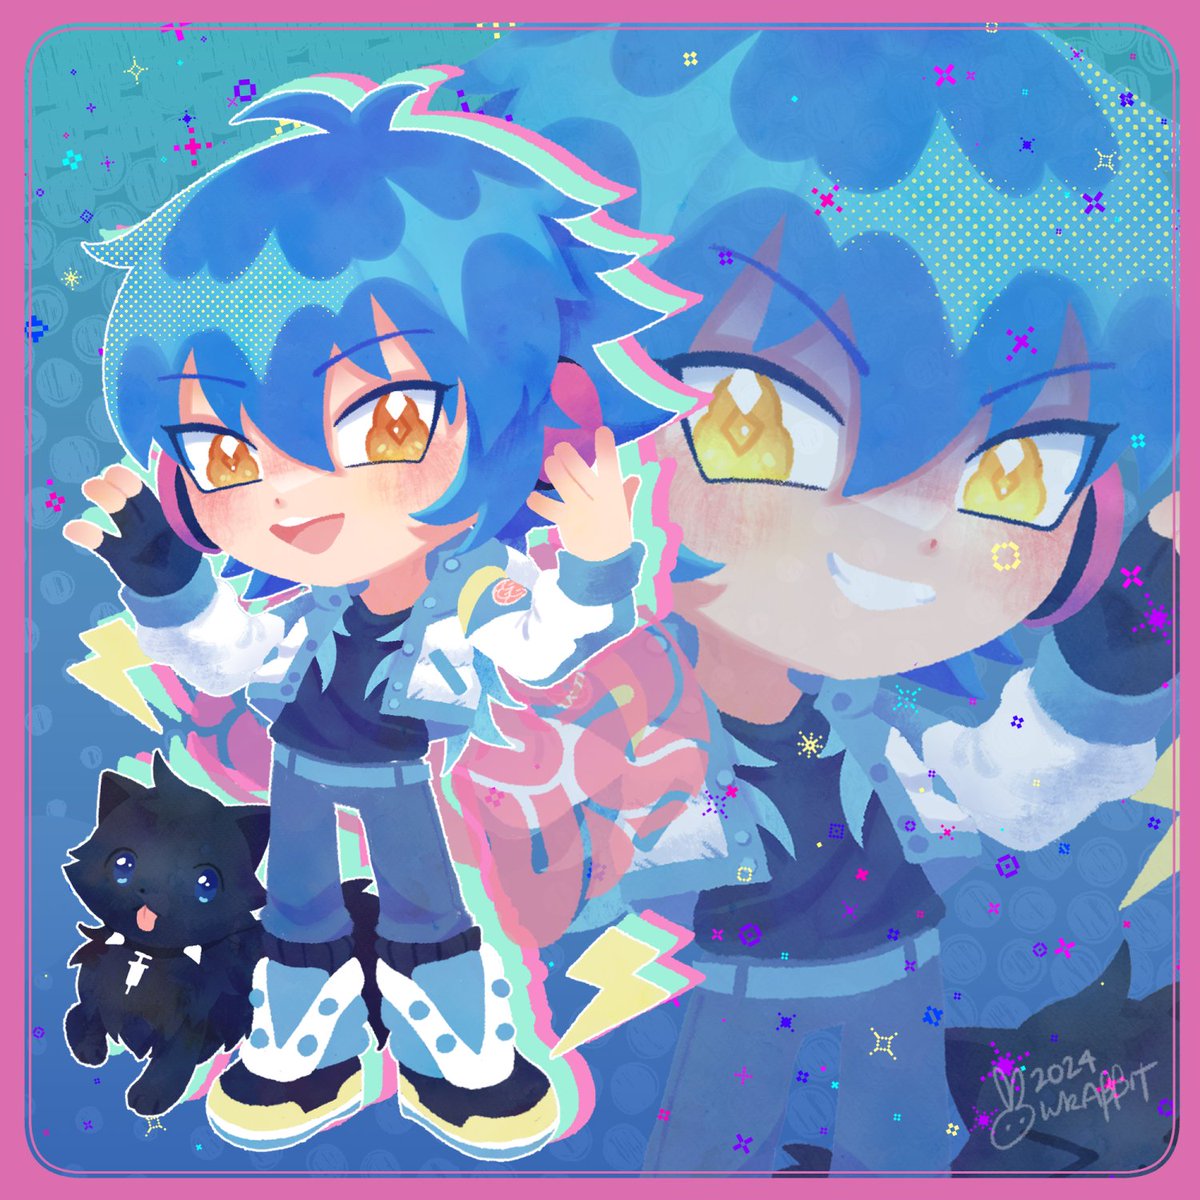 「aoba dmmd in 2024??? 」|wrabbit @ KONPEITO PLUSHIE OPEN!!!のイラスト